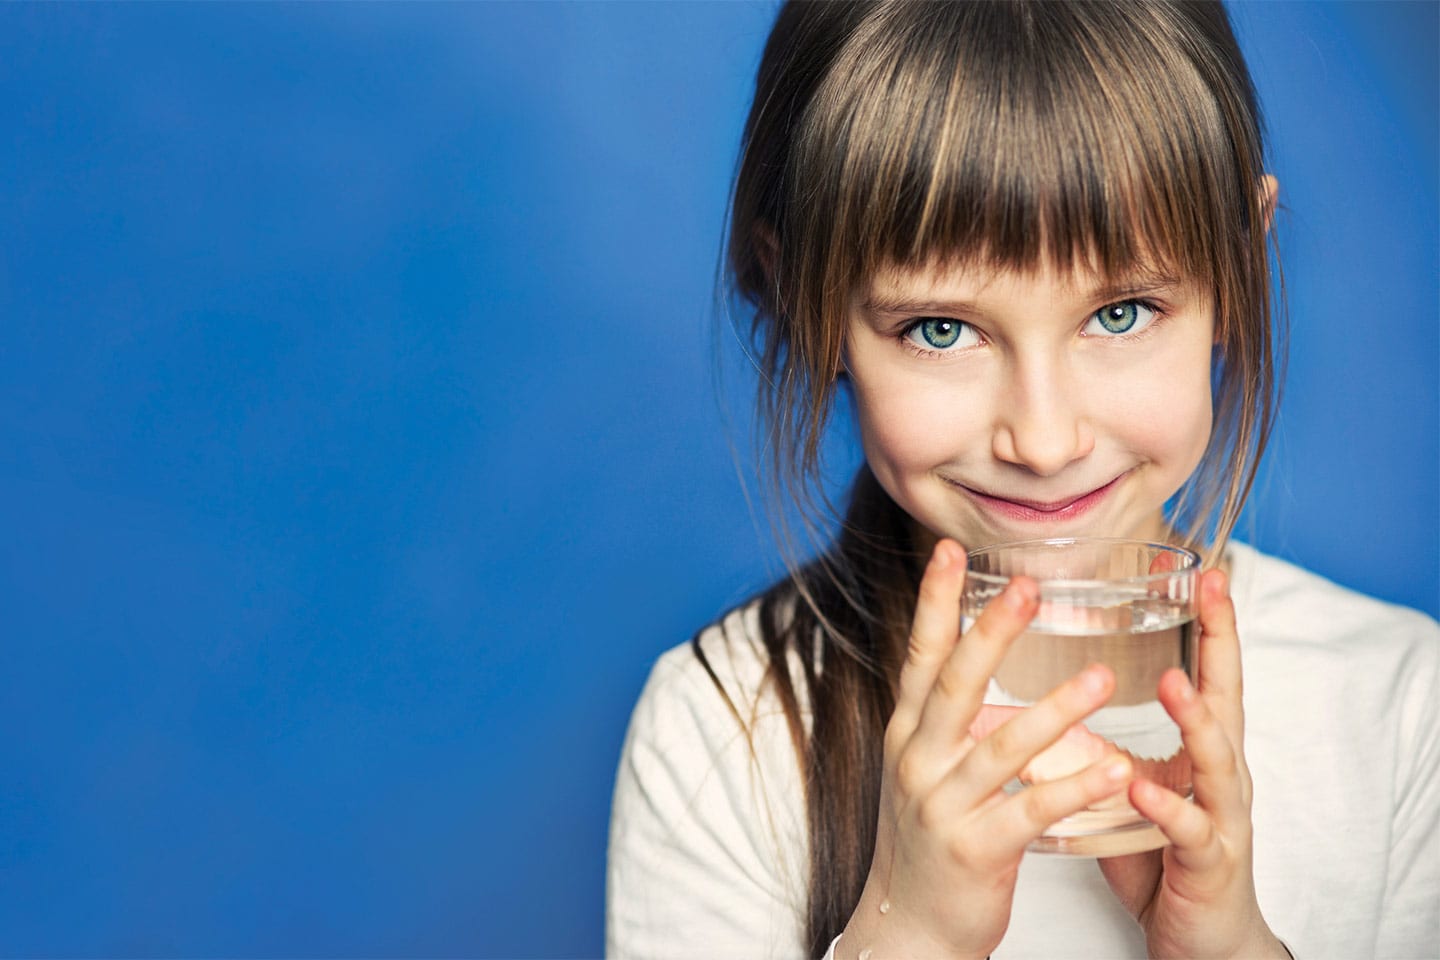 little girl drinking a glass of water on a blue background in chattanooga